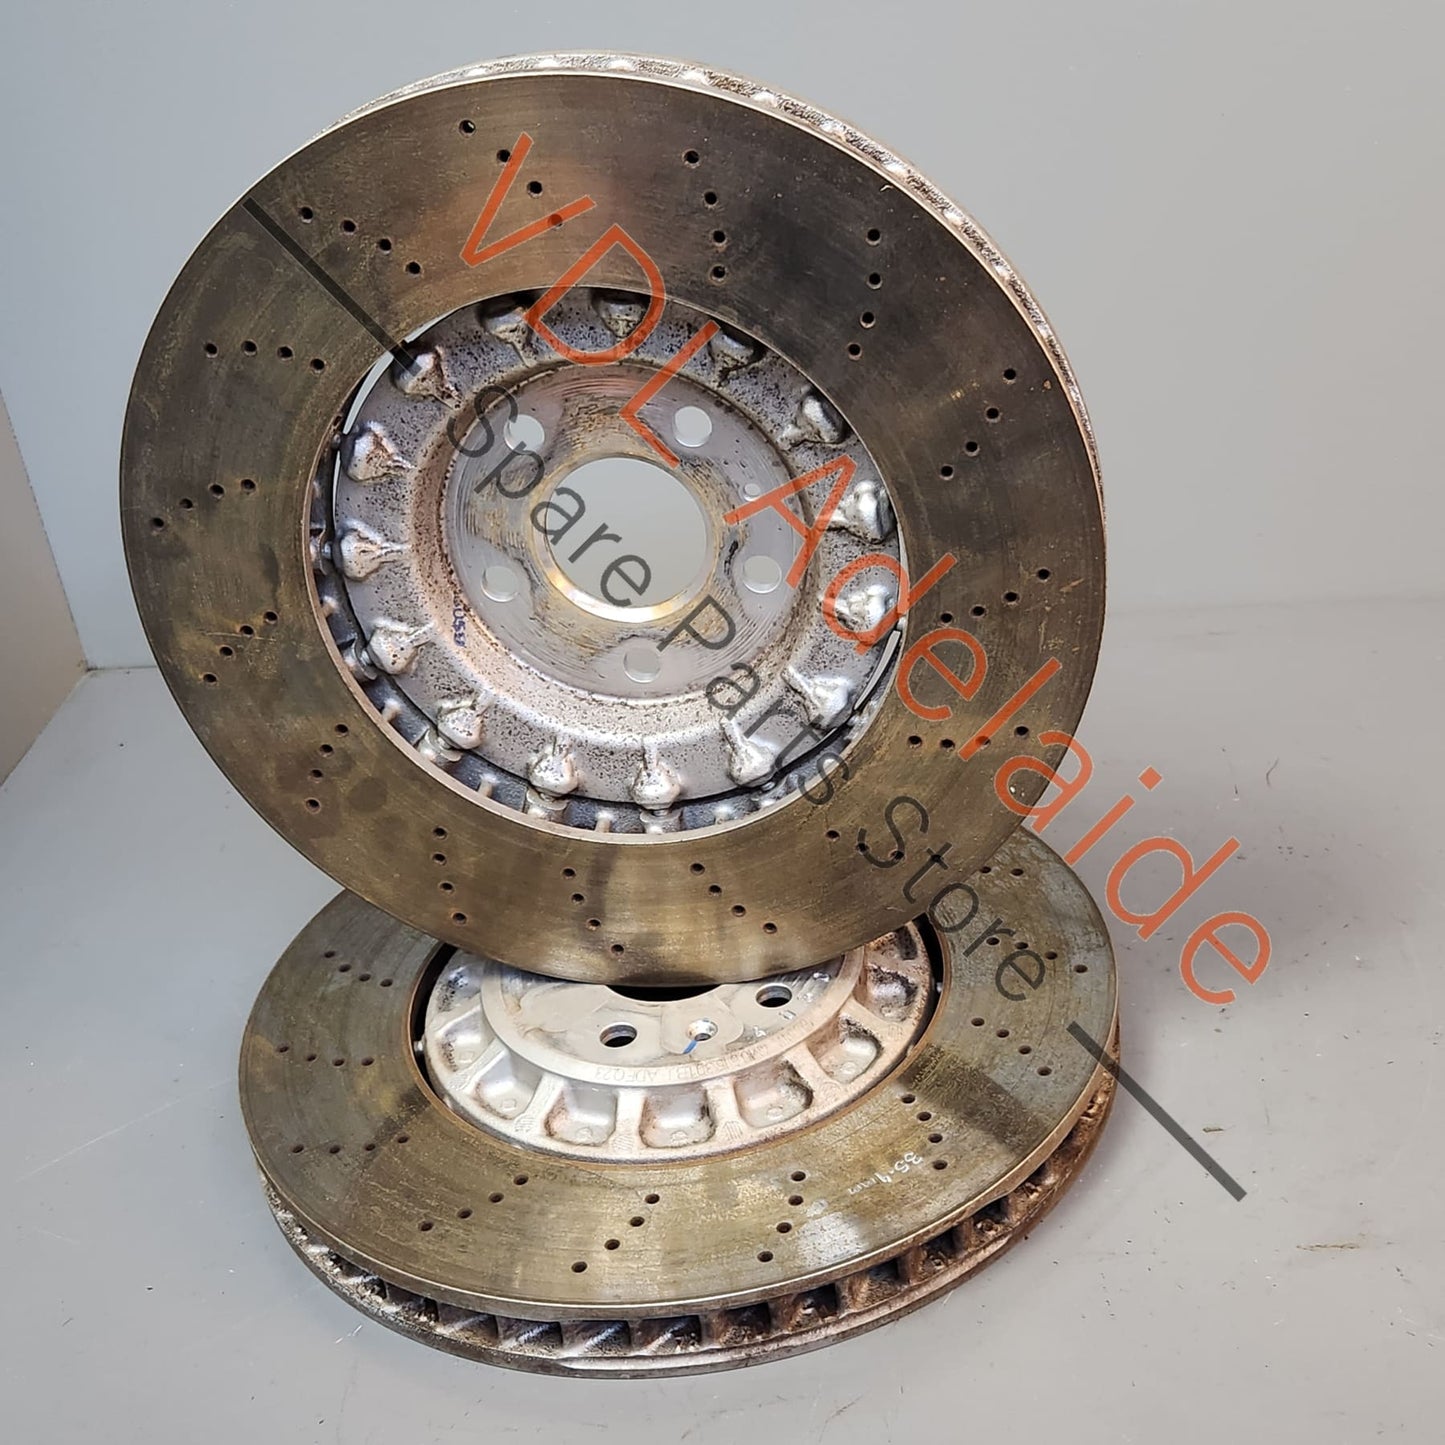 4M0615301BJ    PAIR OF Audi RSQ3 F3 Front Vented & Punched Disc Brake Rotor Rotors 374mm x 36mm 4M0615301BJ